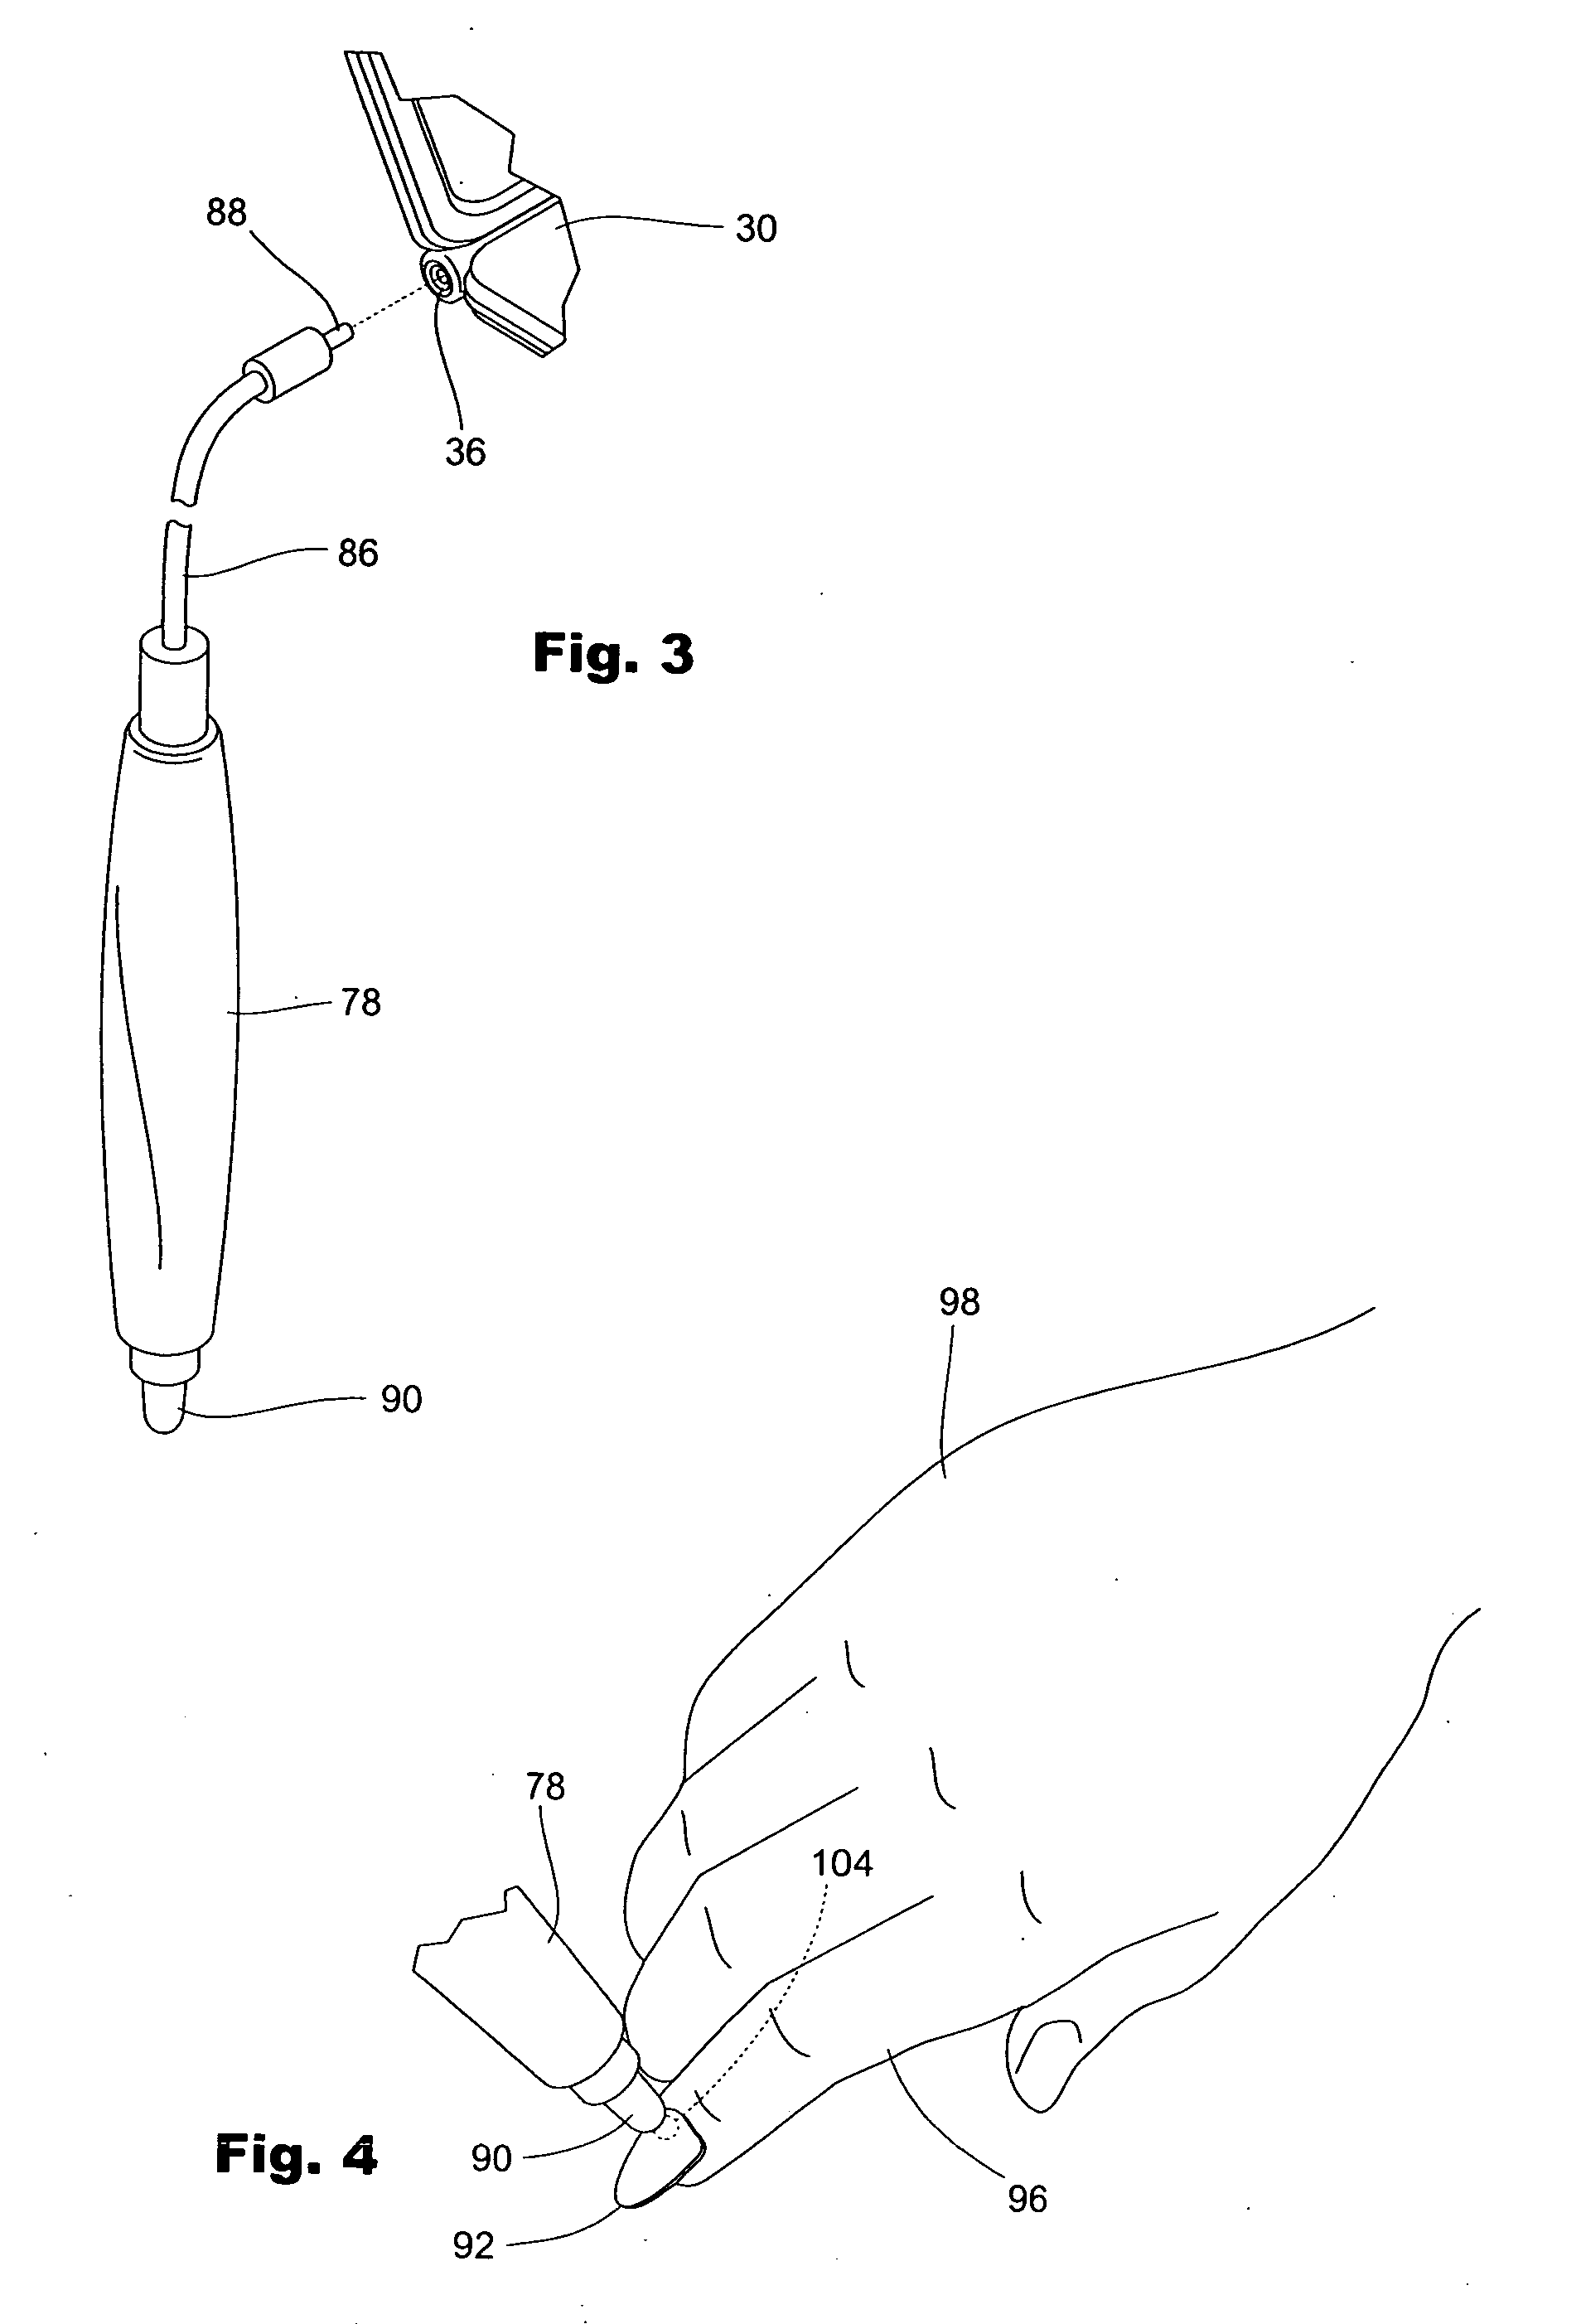 Artificial nail decorating system utilizing computer technology